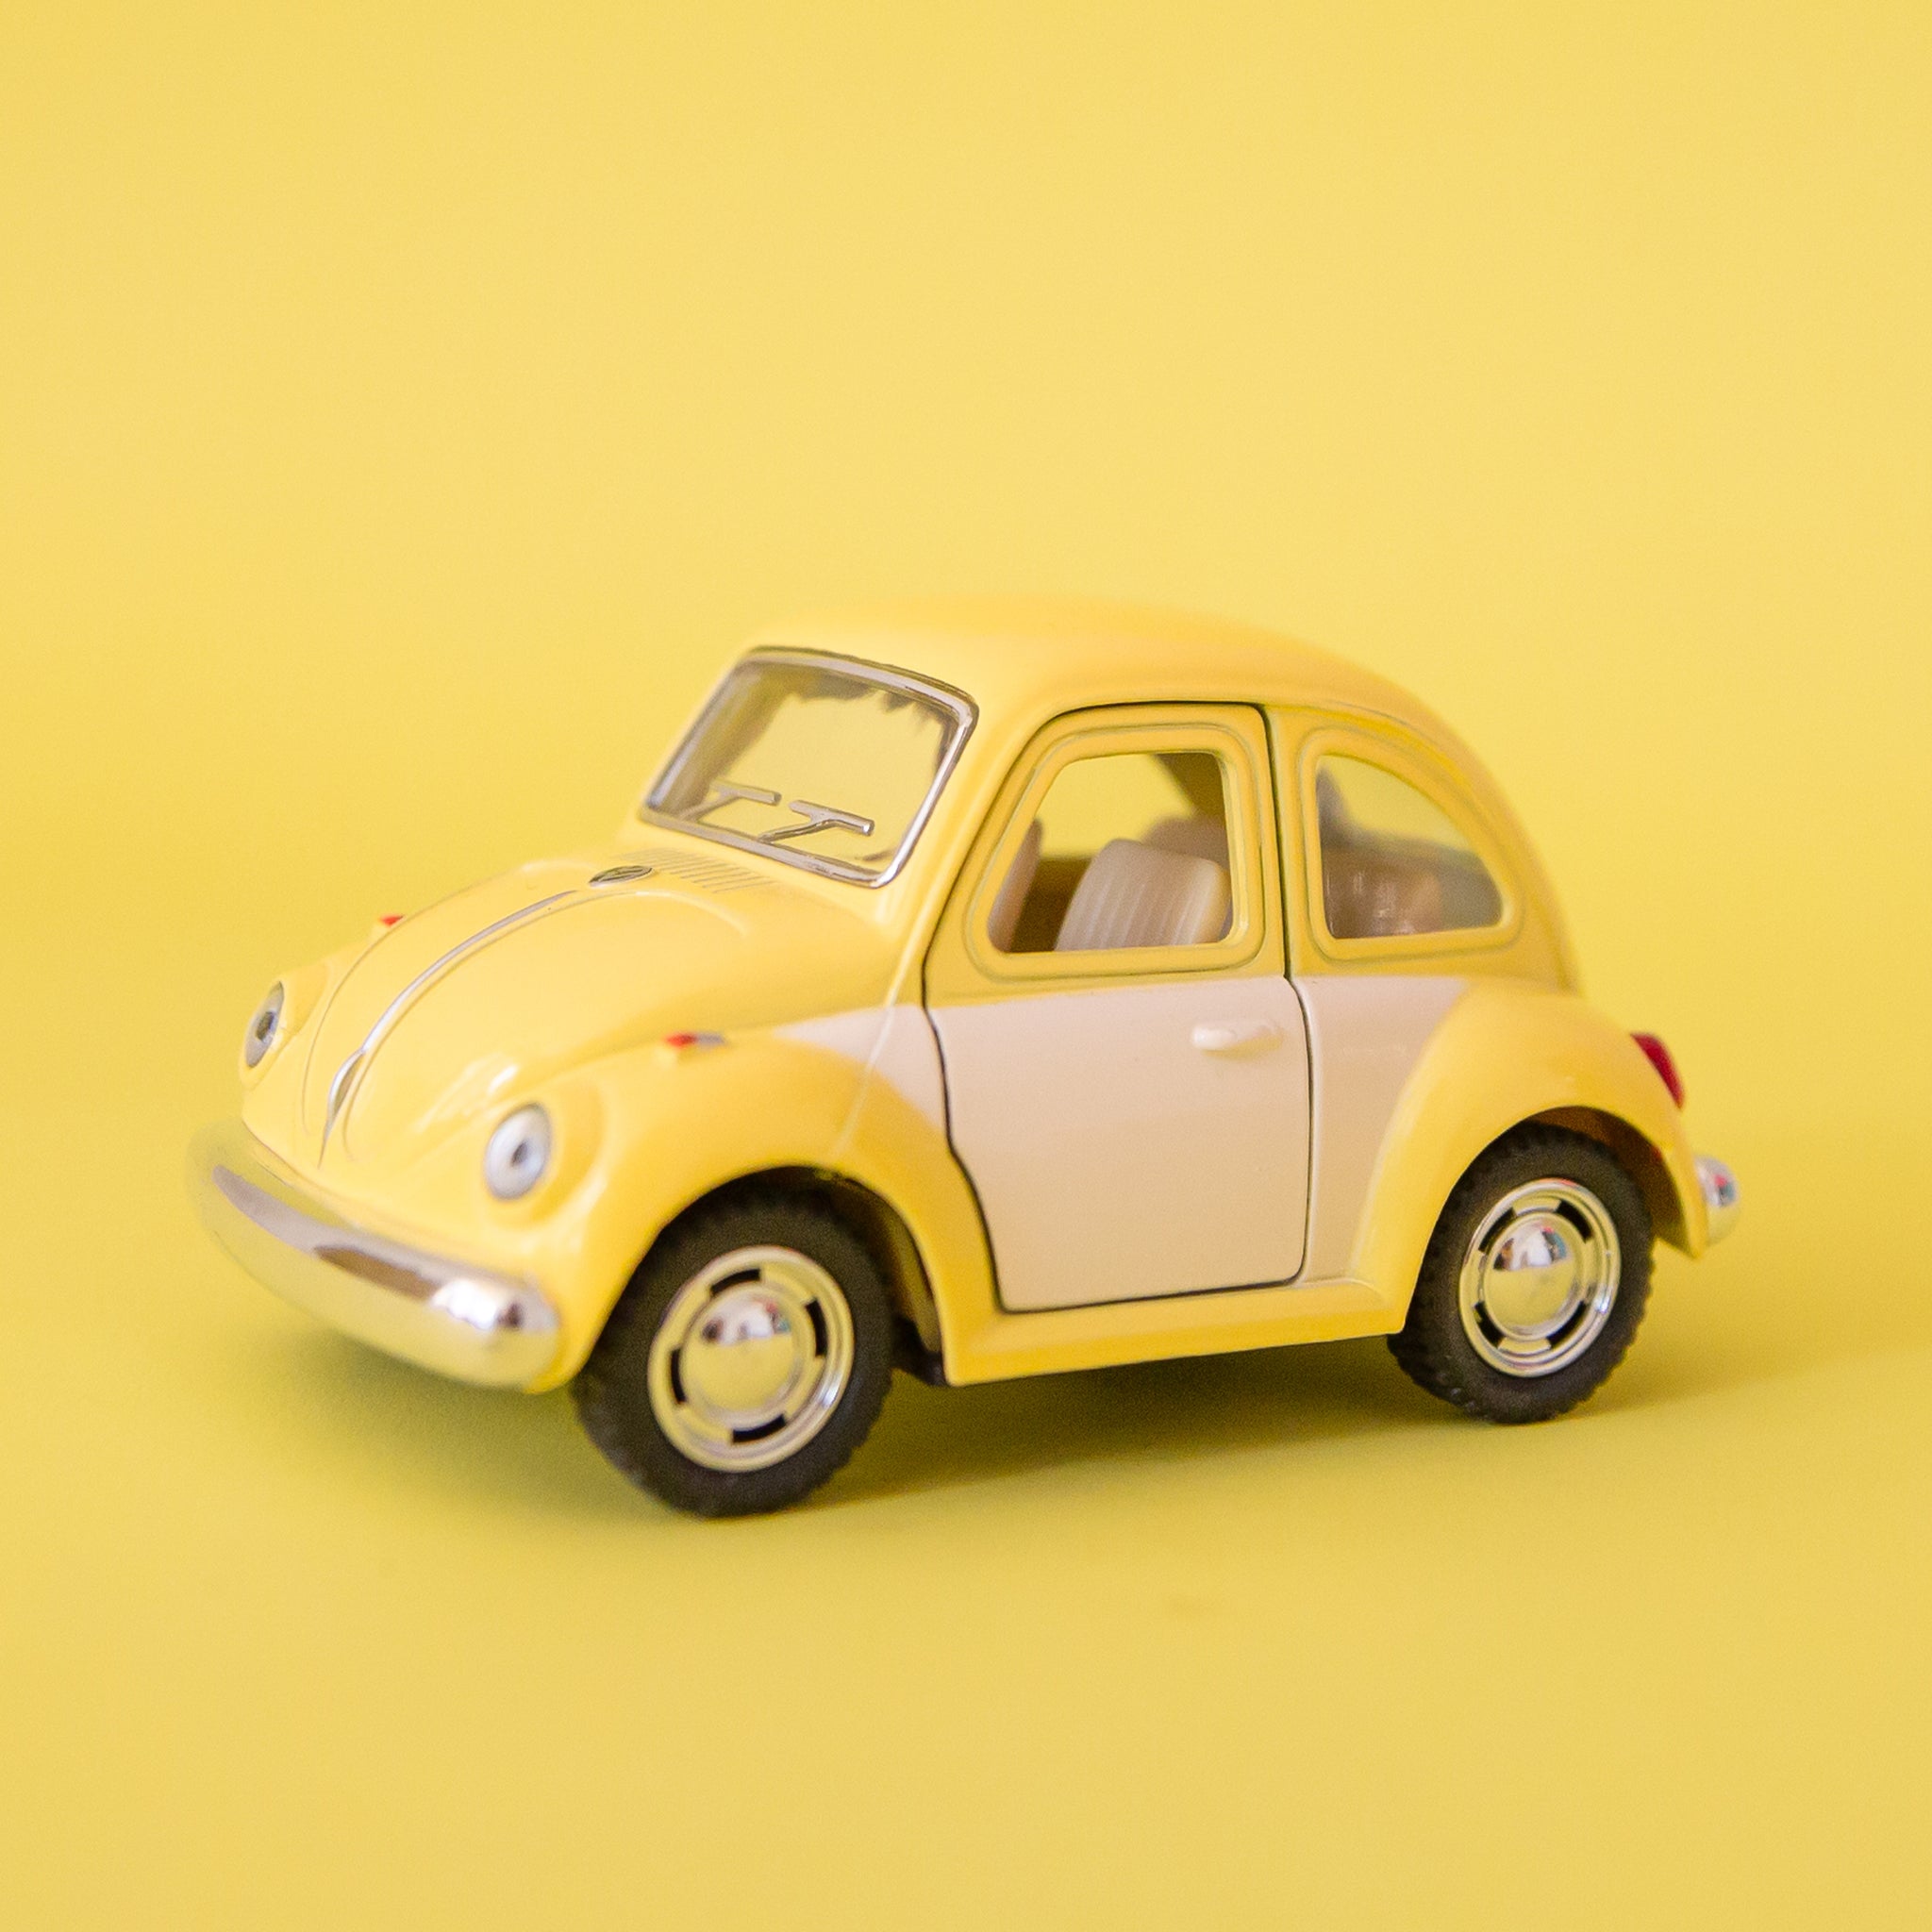 A yellow and white metal toy car volkswagen beetle.